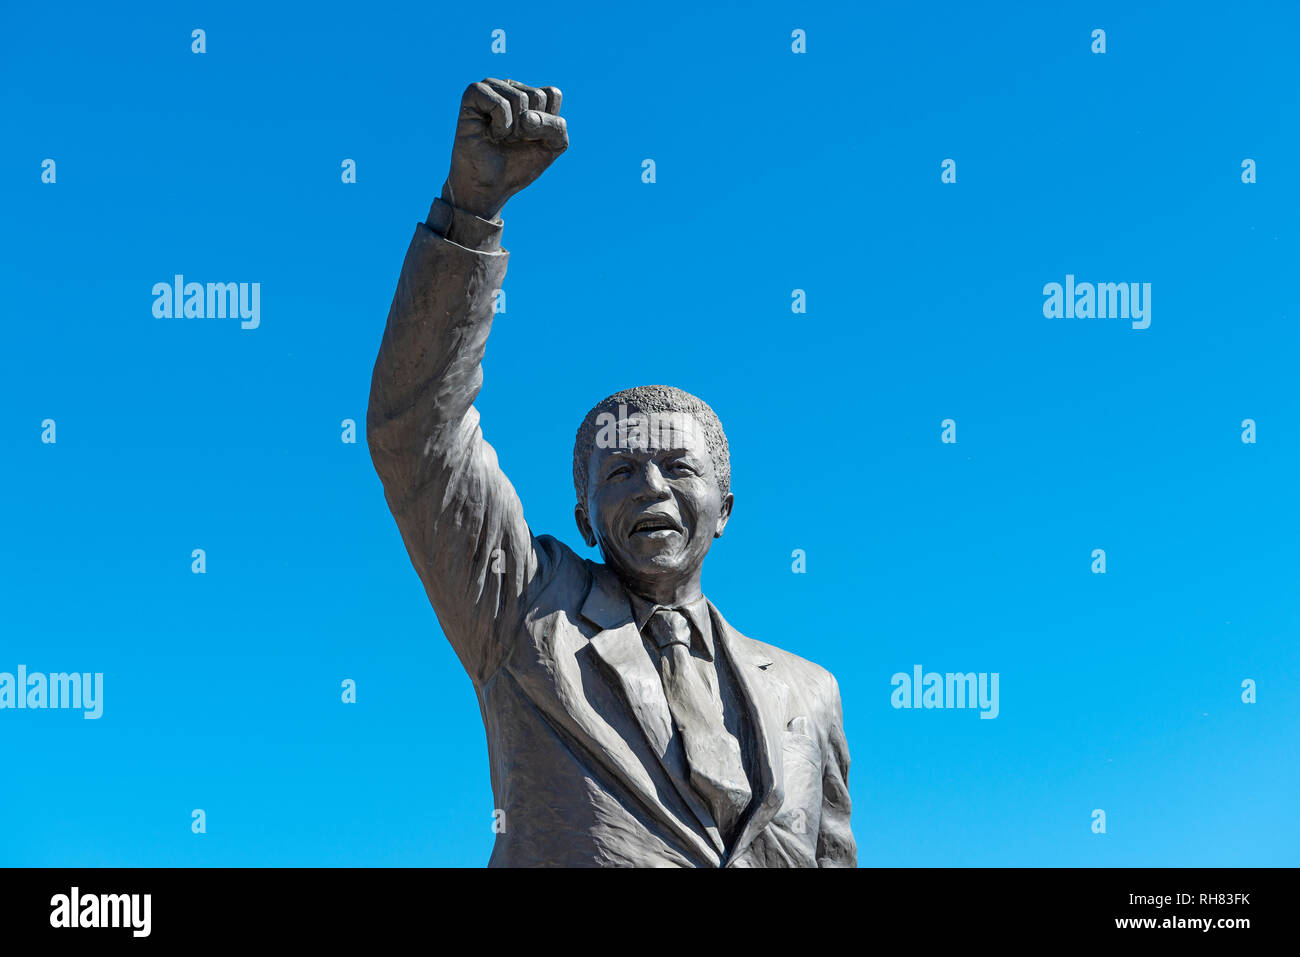 Nelson Mandela statue with raised fist, Drakenstein Correctional Centre, Cape Town, South Africa. Stock Photo